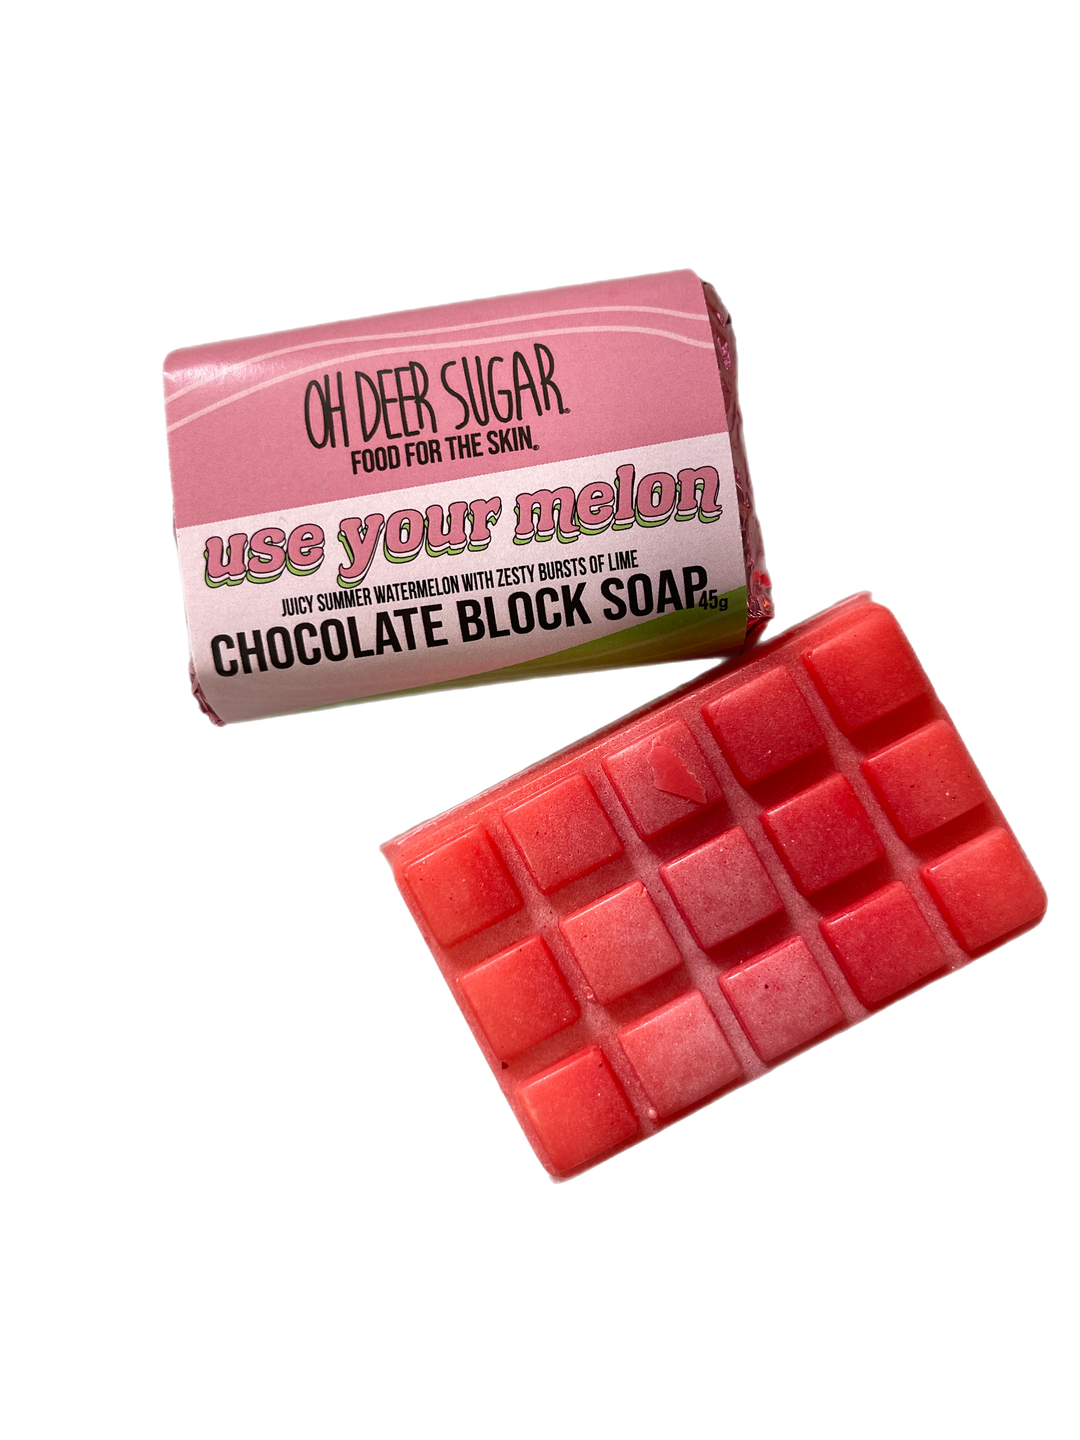 use your melon CHOCOLATE BLOCK Soap 45g